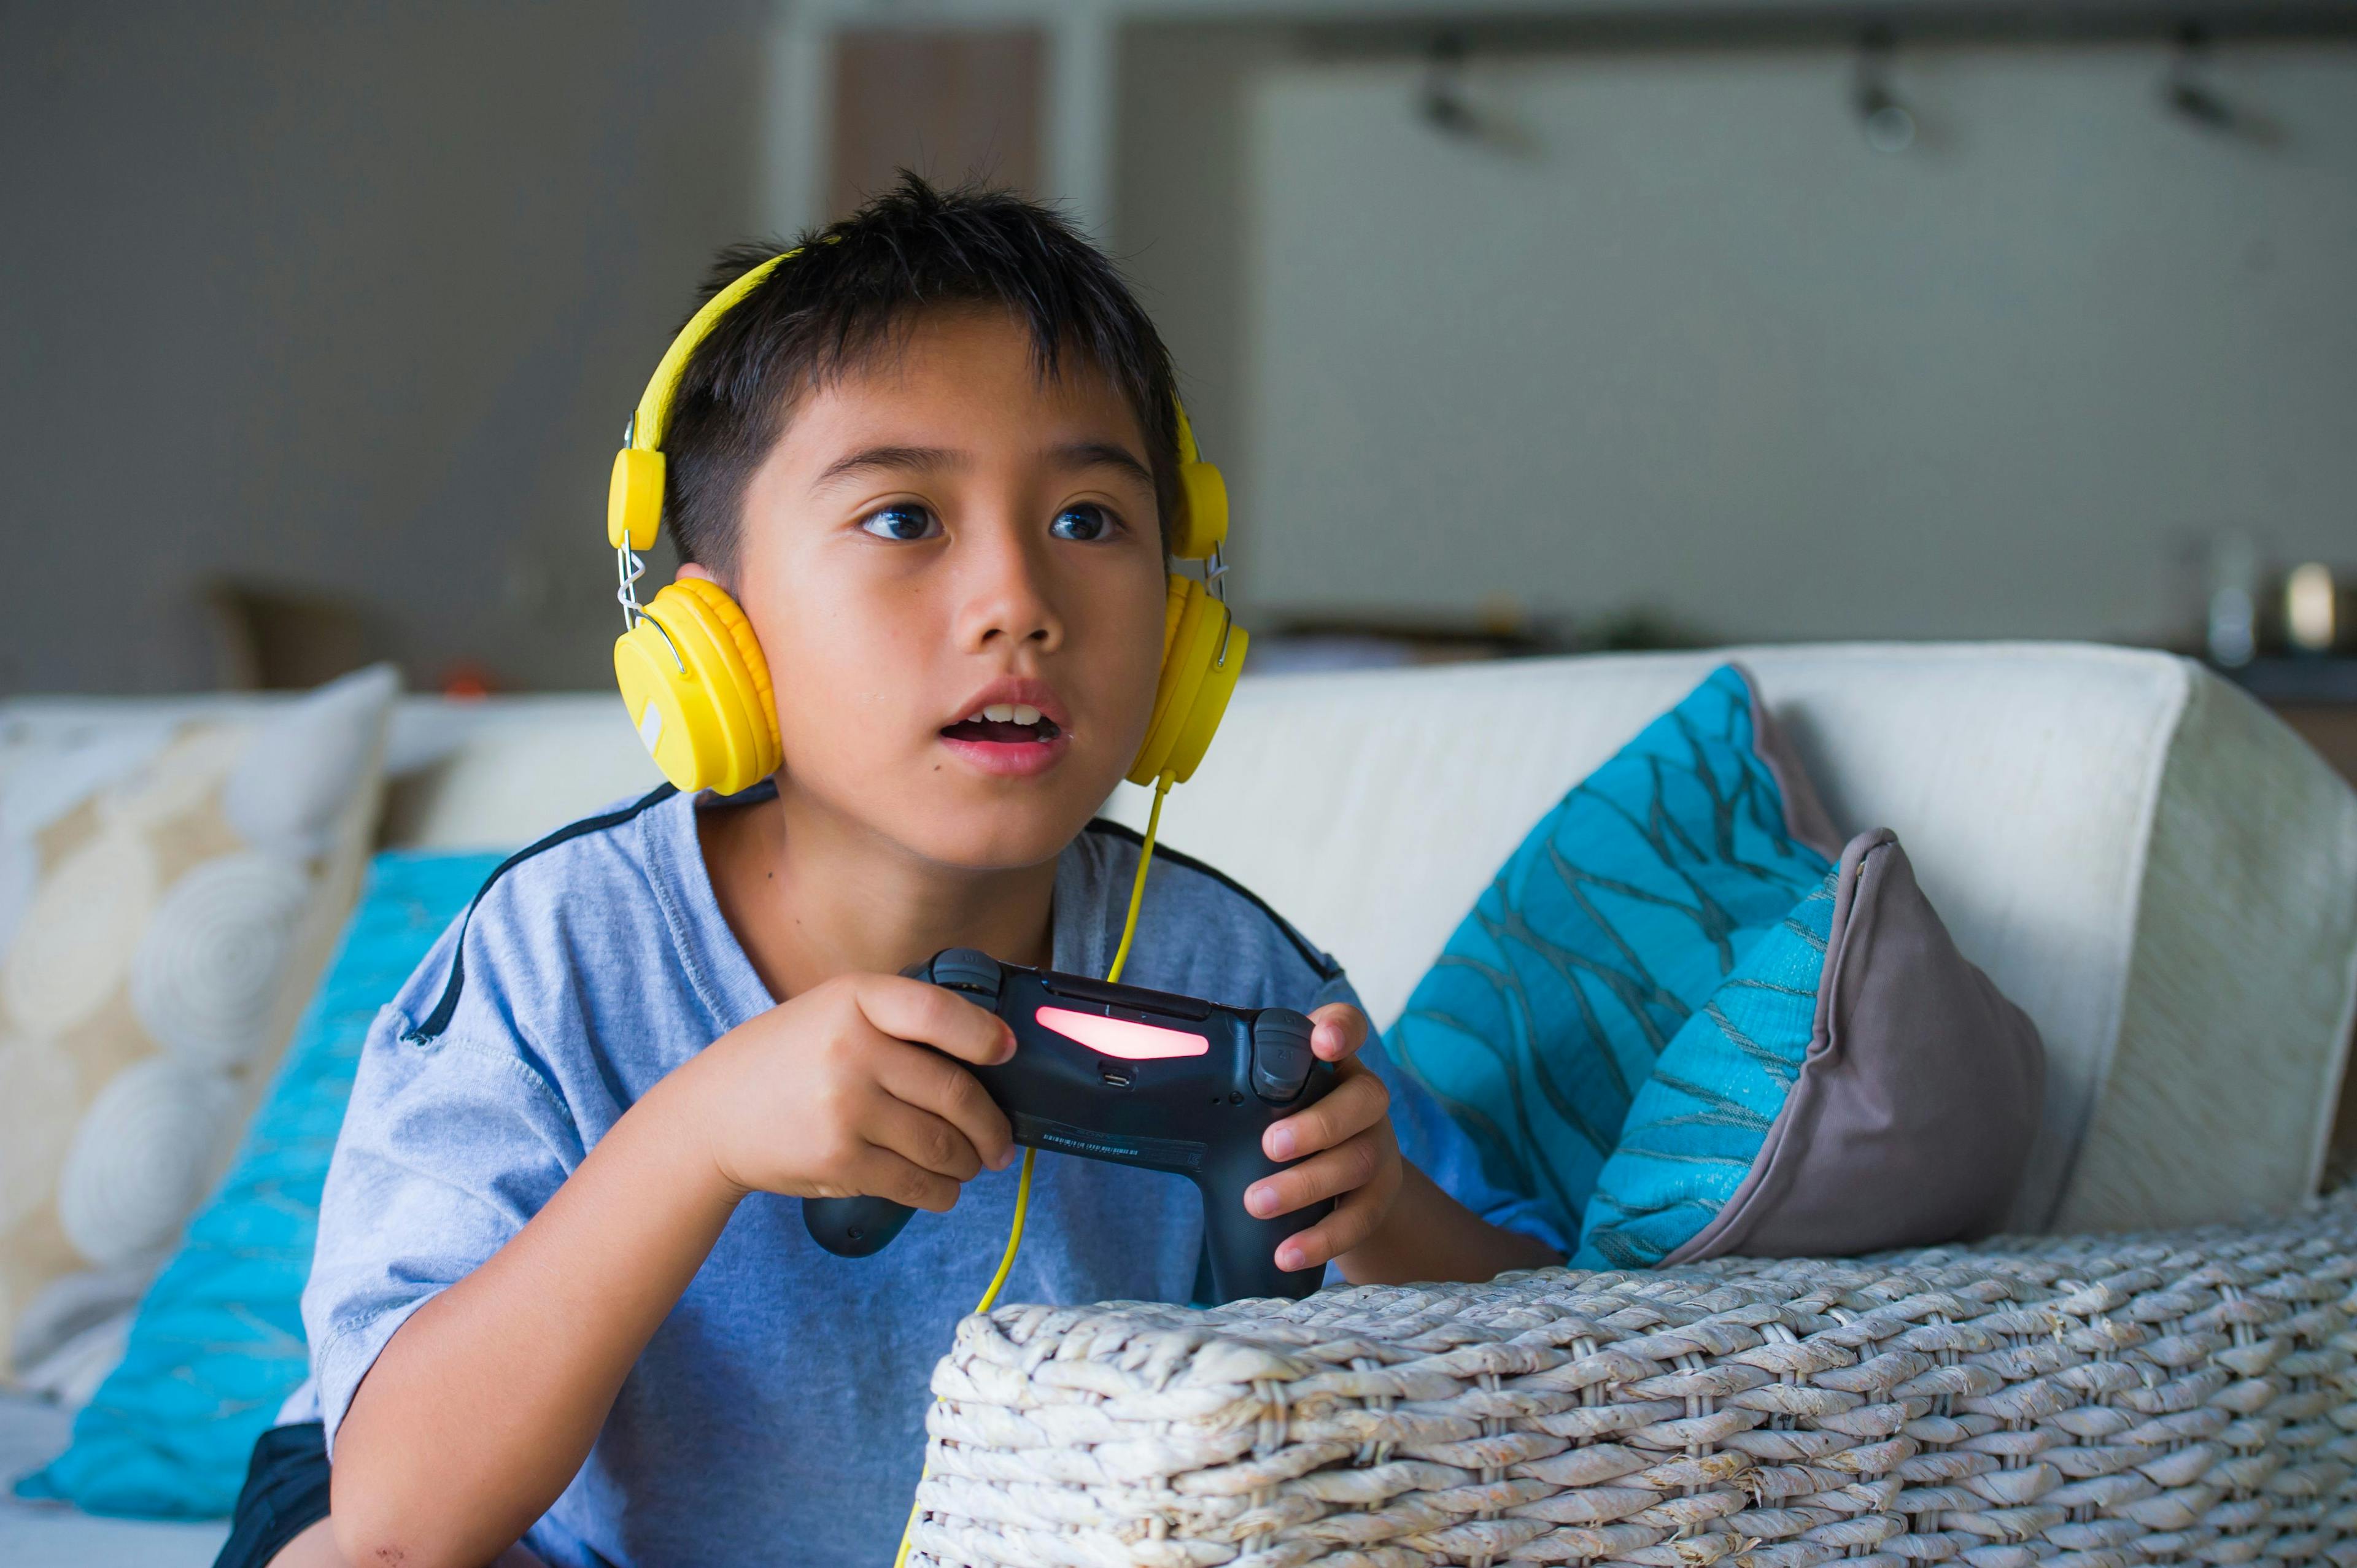 Video gaming improves cognitive performance in children